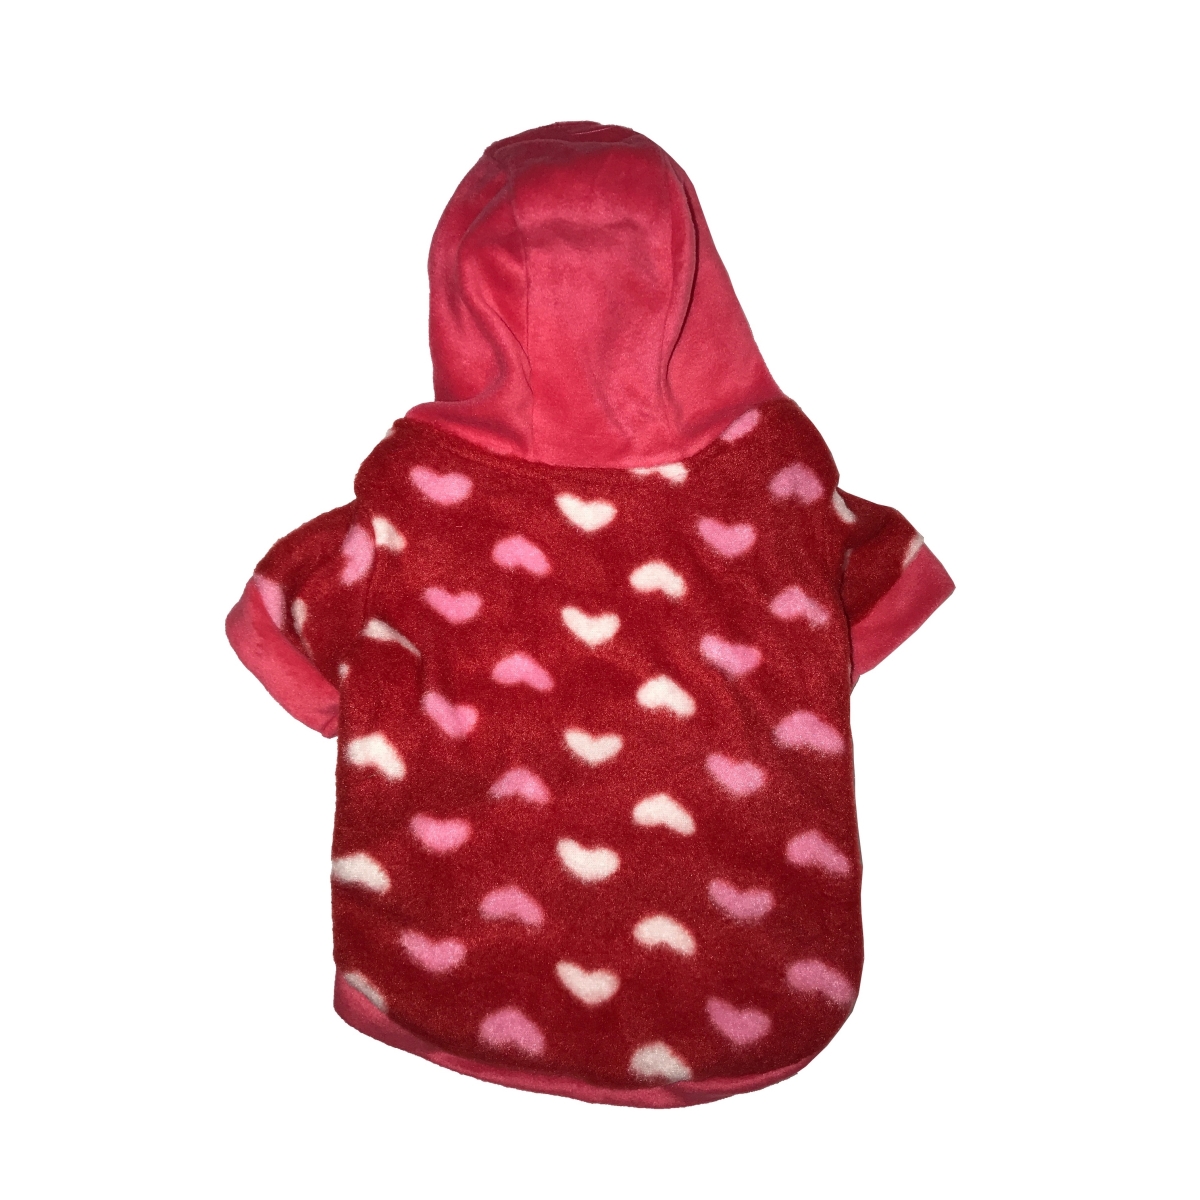 Dghhpk-s Warm Hearts Hoodie, Pink - Small